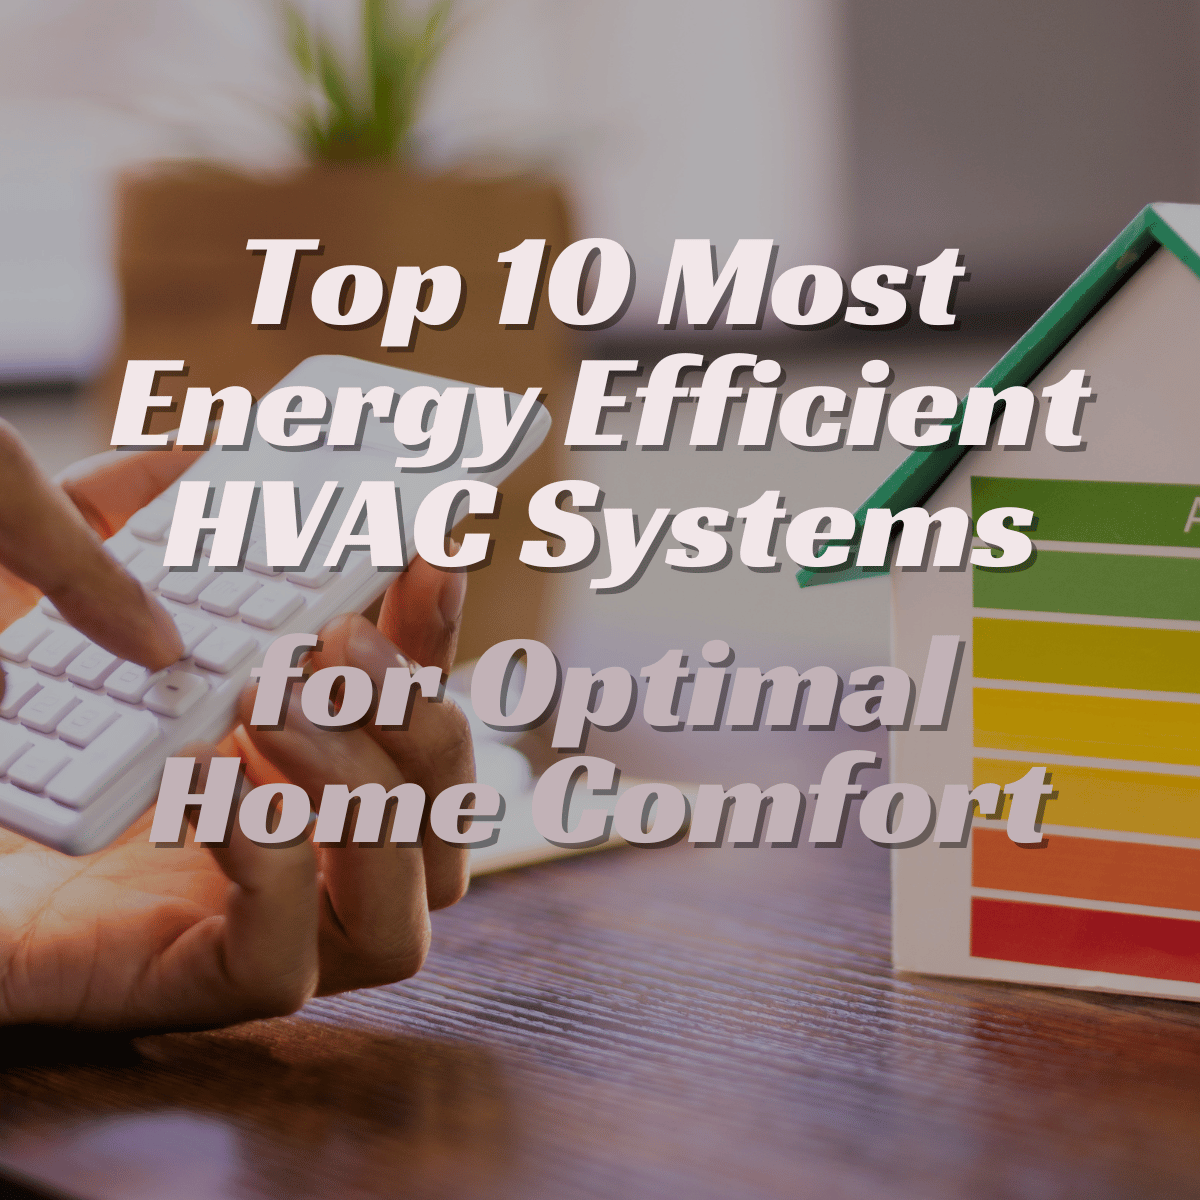 Top 10 Most Energy Efficient HVAC Systems for Optimal Home Comfort